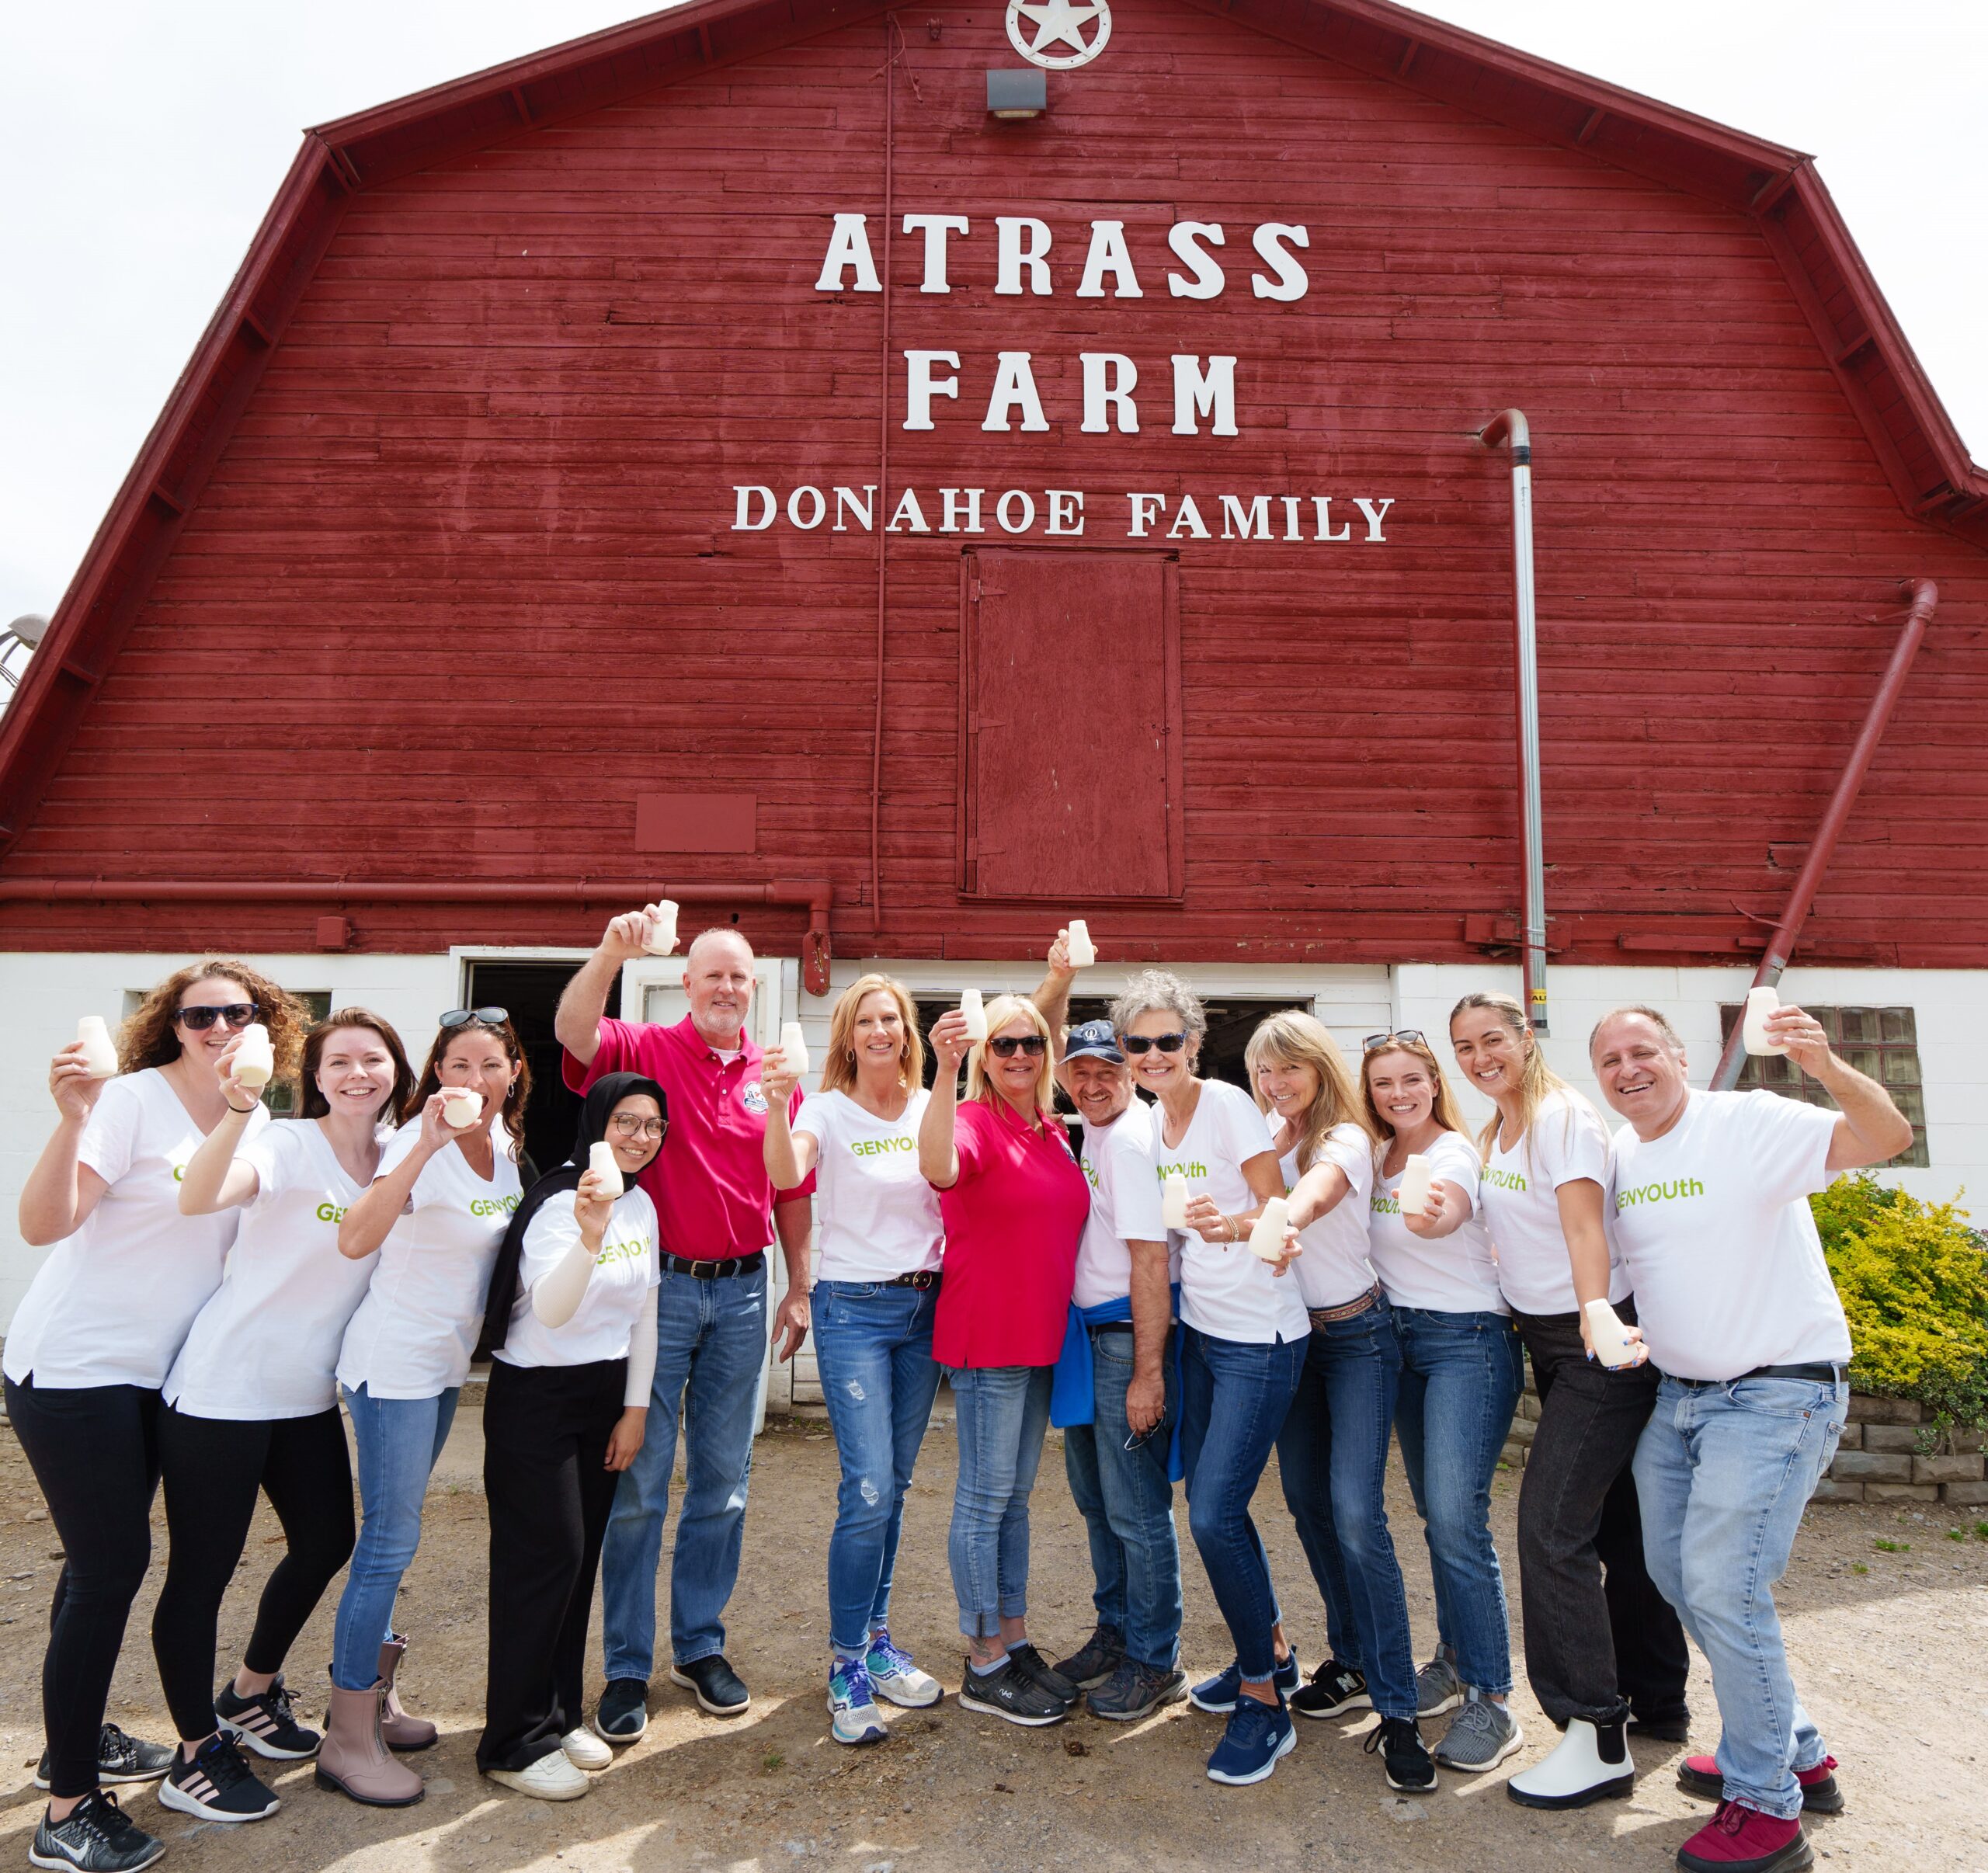 A group of people in front of a red barn, each holding a bottle of milk.